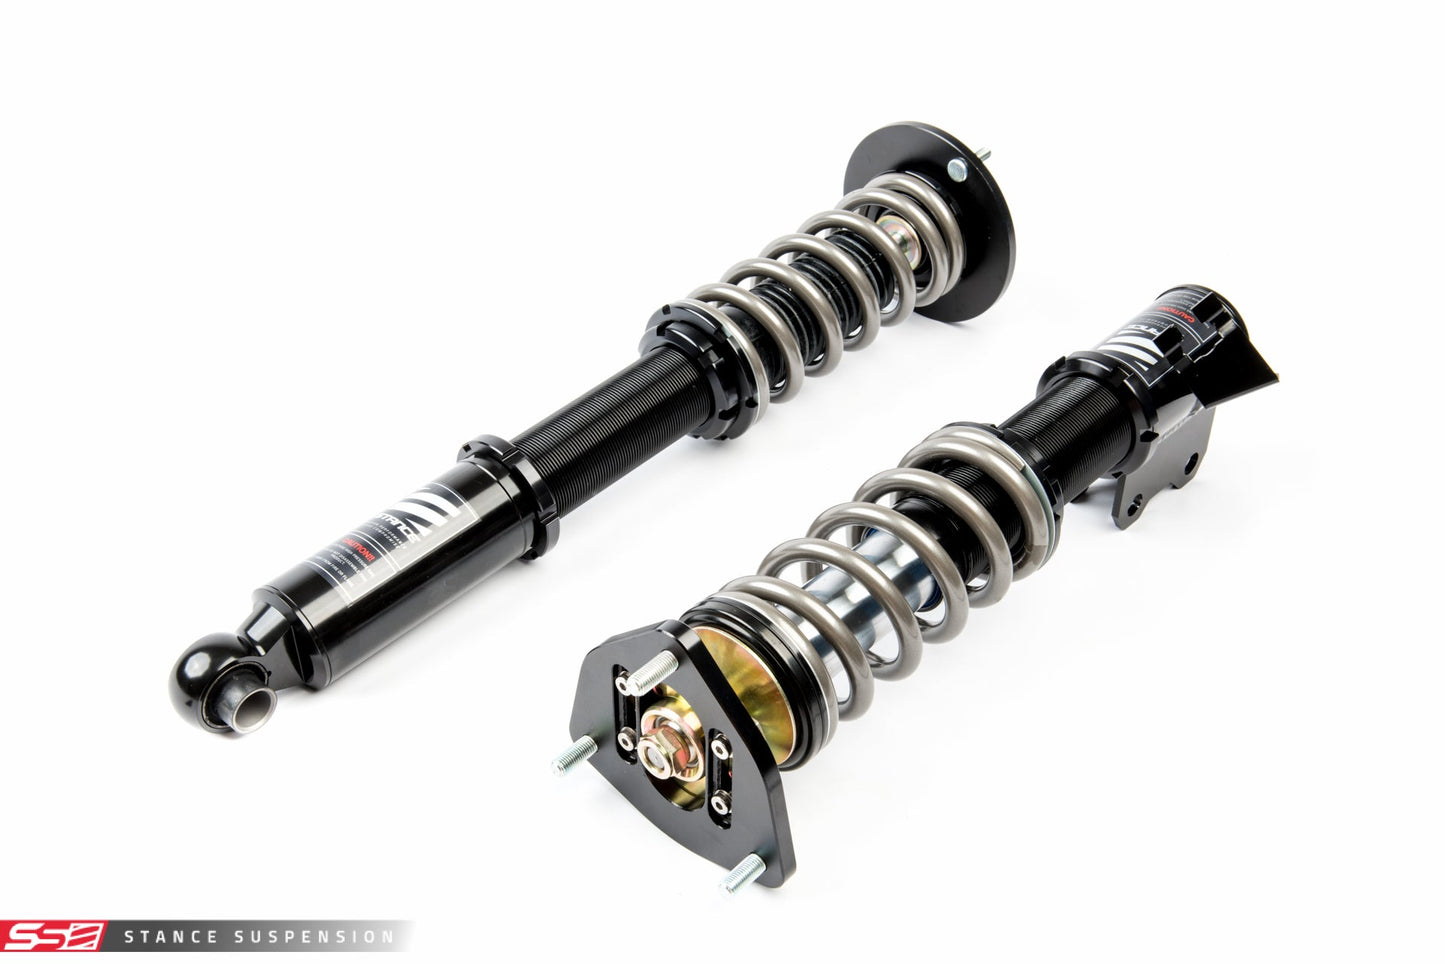 Stance Suspension - XR1 Coilovers for 95-98 Nissan 240SX S14 (ST-S14-XR1)